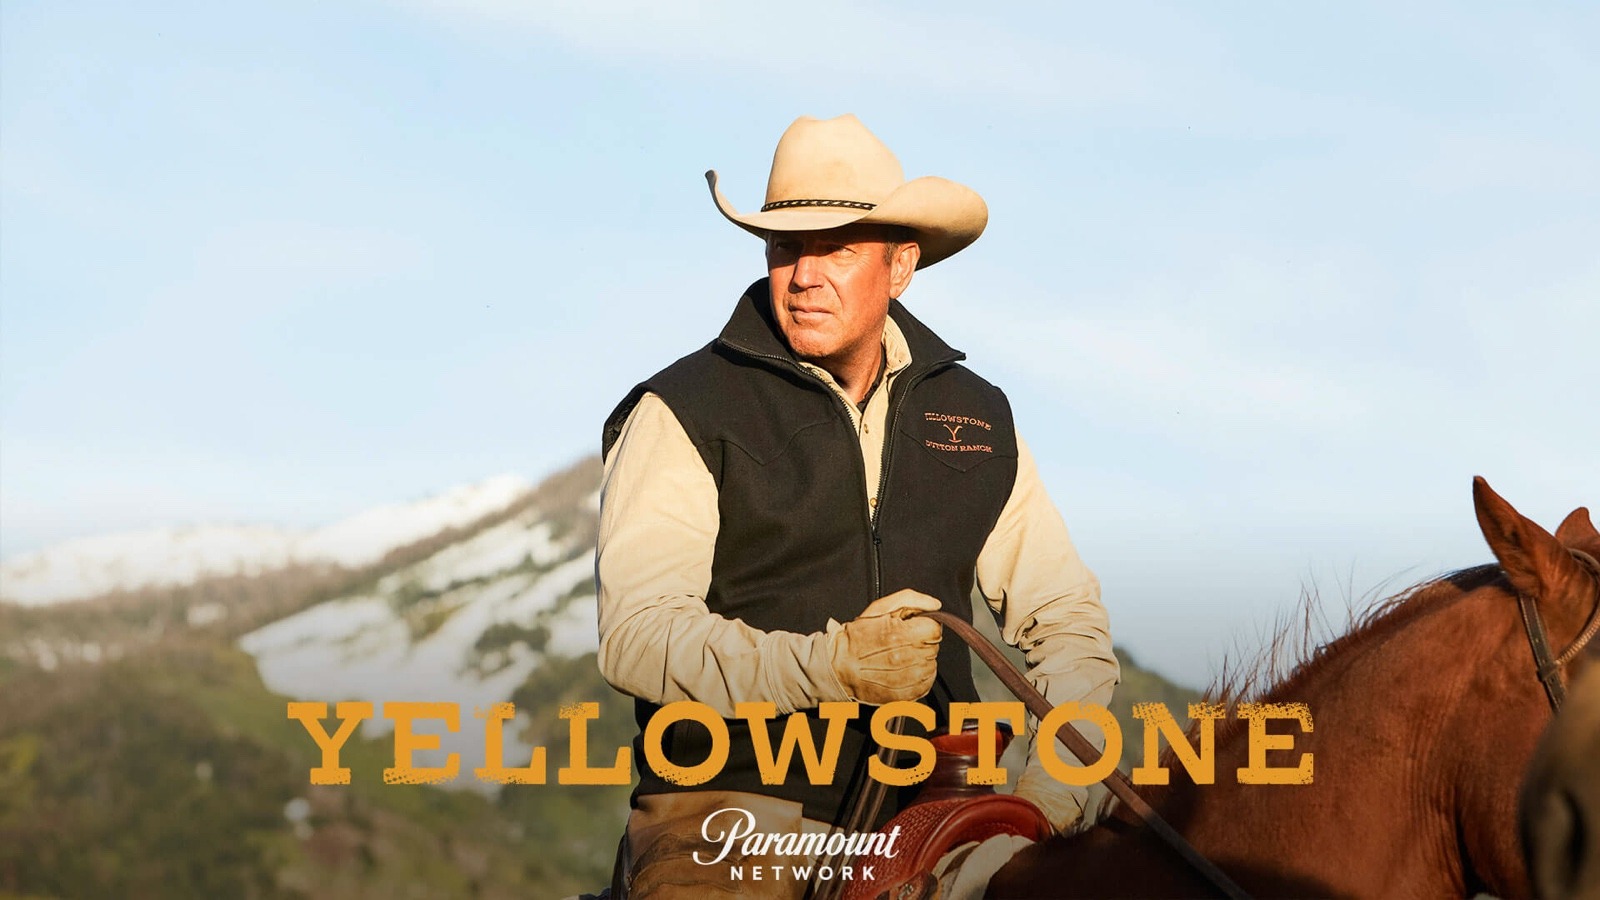 The TV modern Western melodrama "Yellowstone" starring Kevin Costner is set in Paradise Valley, Montana.  Two of the real-life menaces written into the storyline involving the fictional Dutton Ranch: brucellosis and greedy land developers. Photo courtesy Paramount 